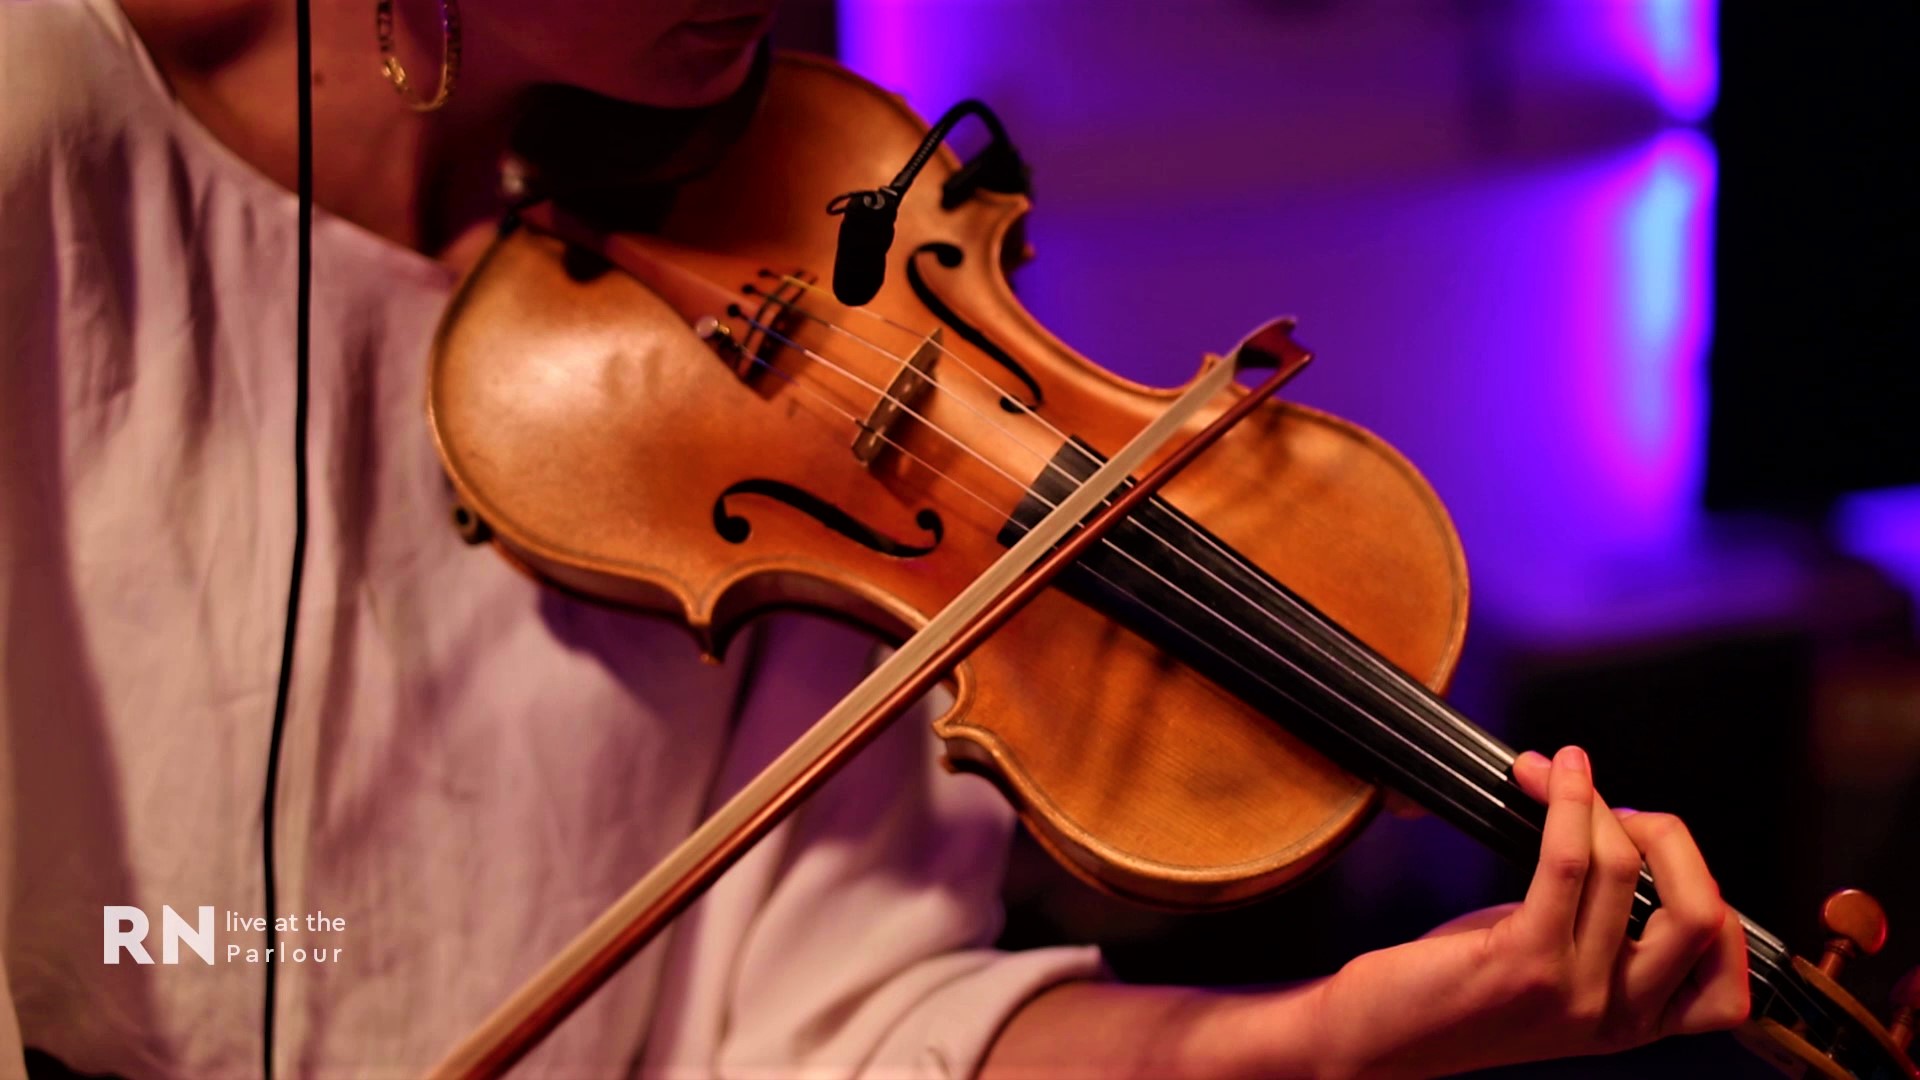 Apple’s app for classical music could be launching soon